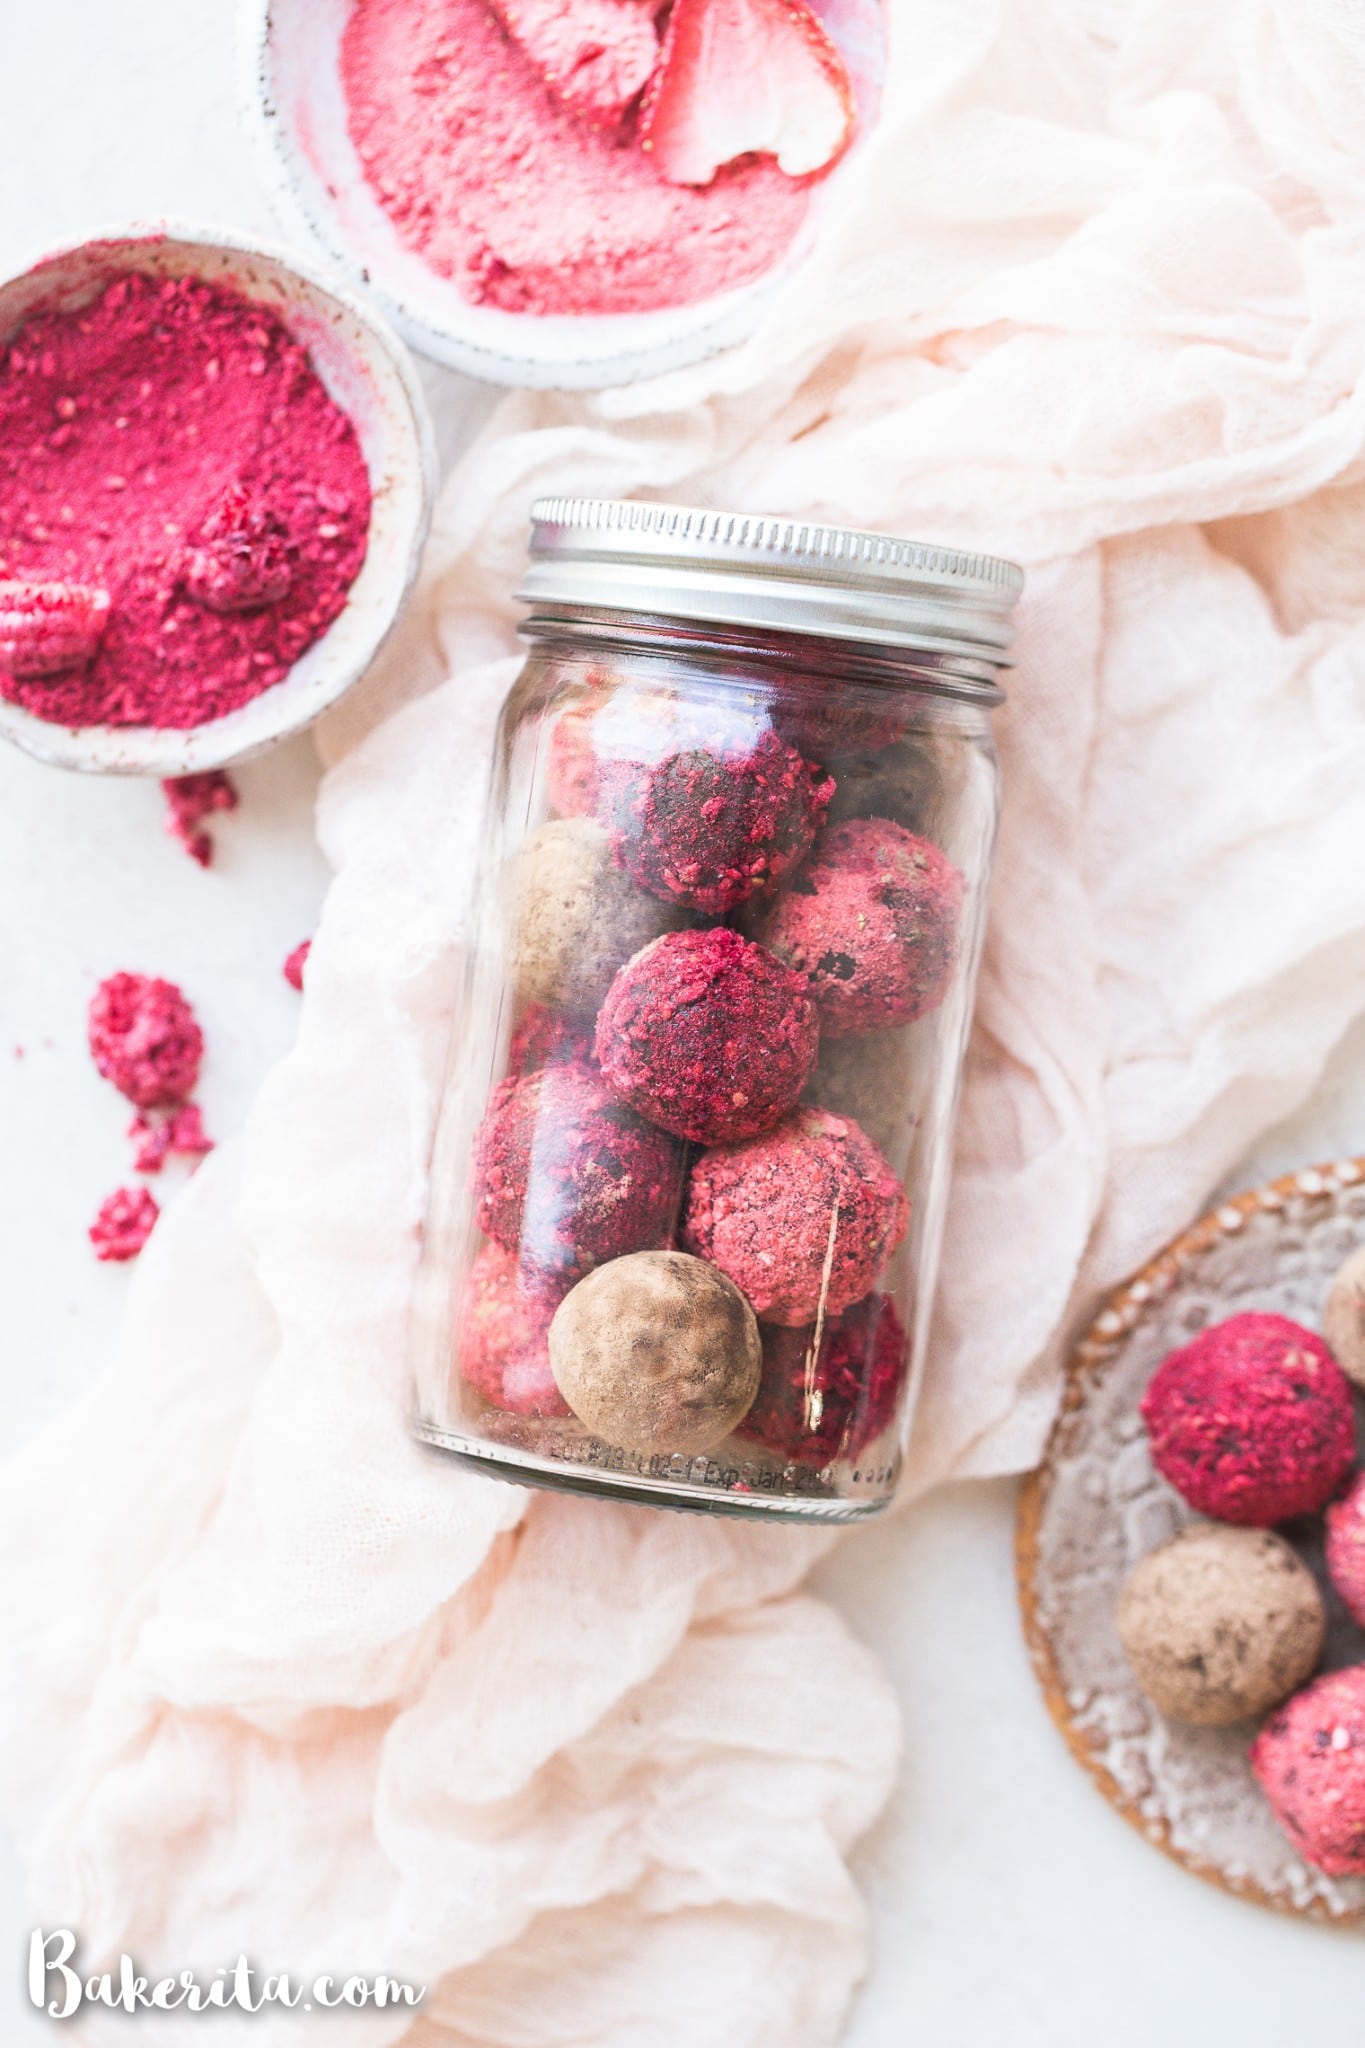 Easy Vegan Chocolate Truffles: made with only FOUR ingredients and they're paleo-friendly with a nut-free option! This simple truffle recipe is the perfect homemade holiday gift.